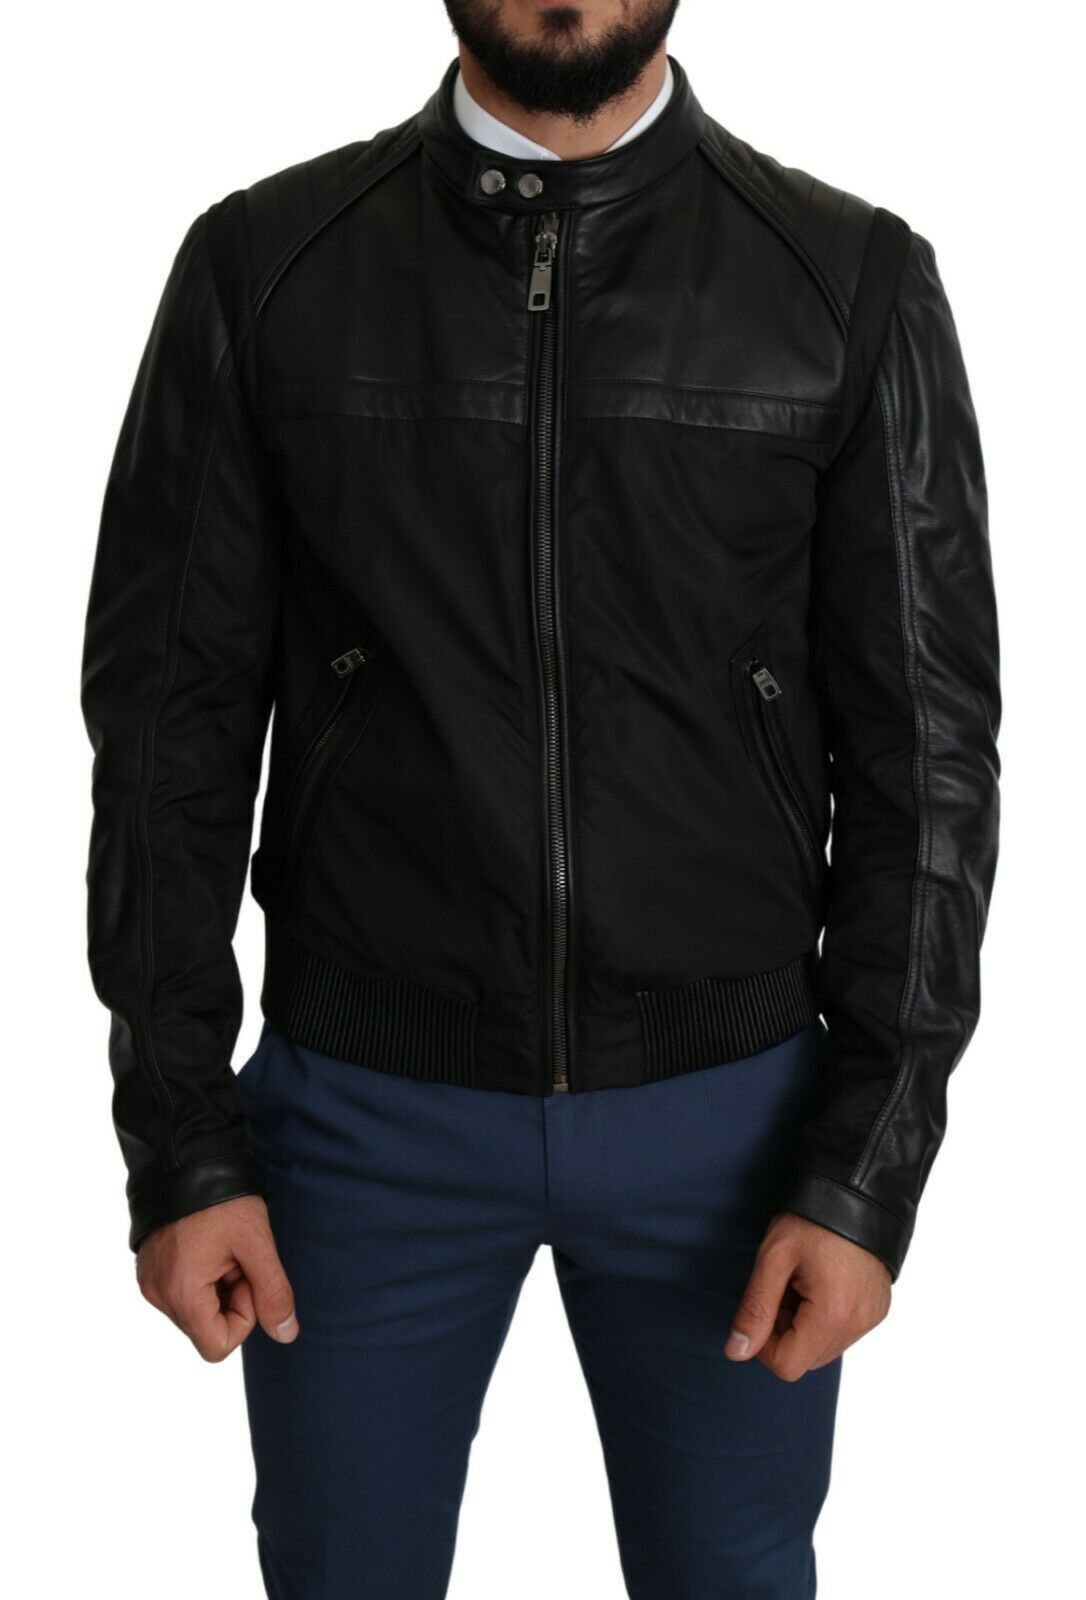 Elegant Black Bomber with Leather Accents